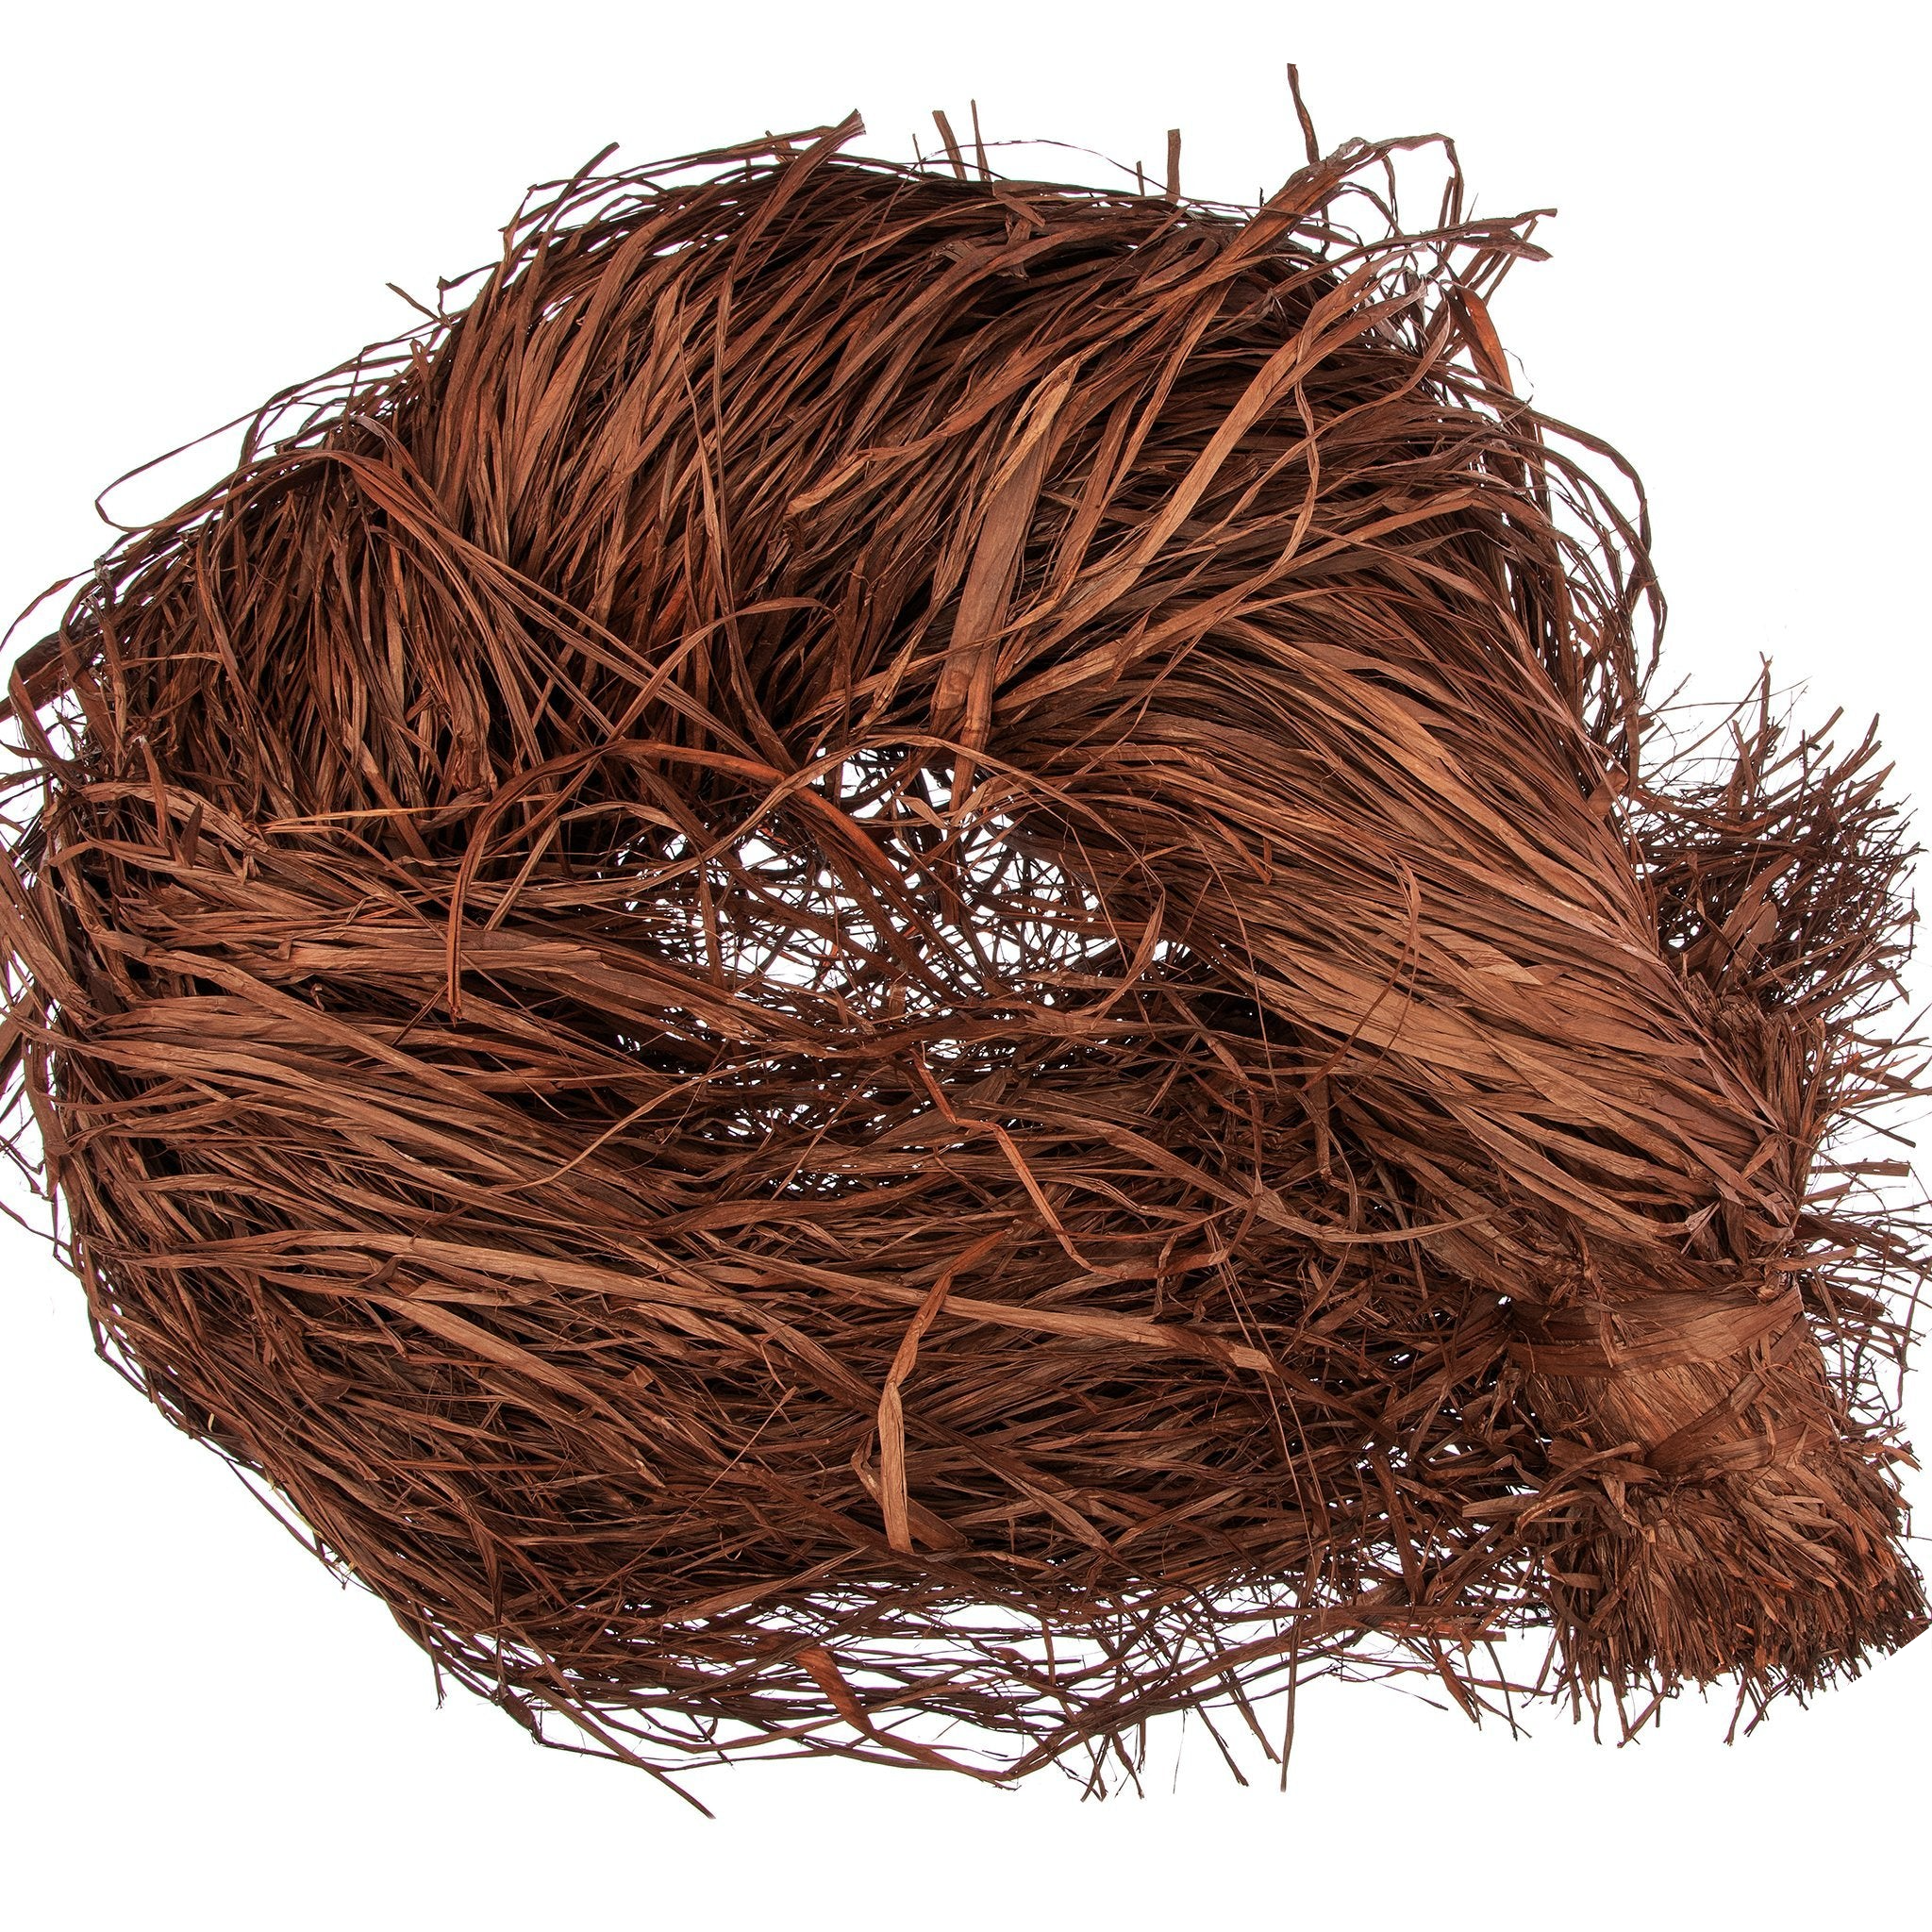 Raffia, Mats, and Hunting Grass for Crafters, Florists, and